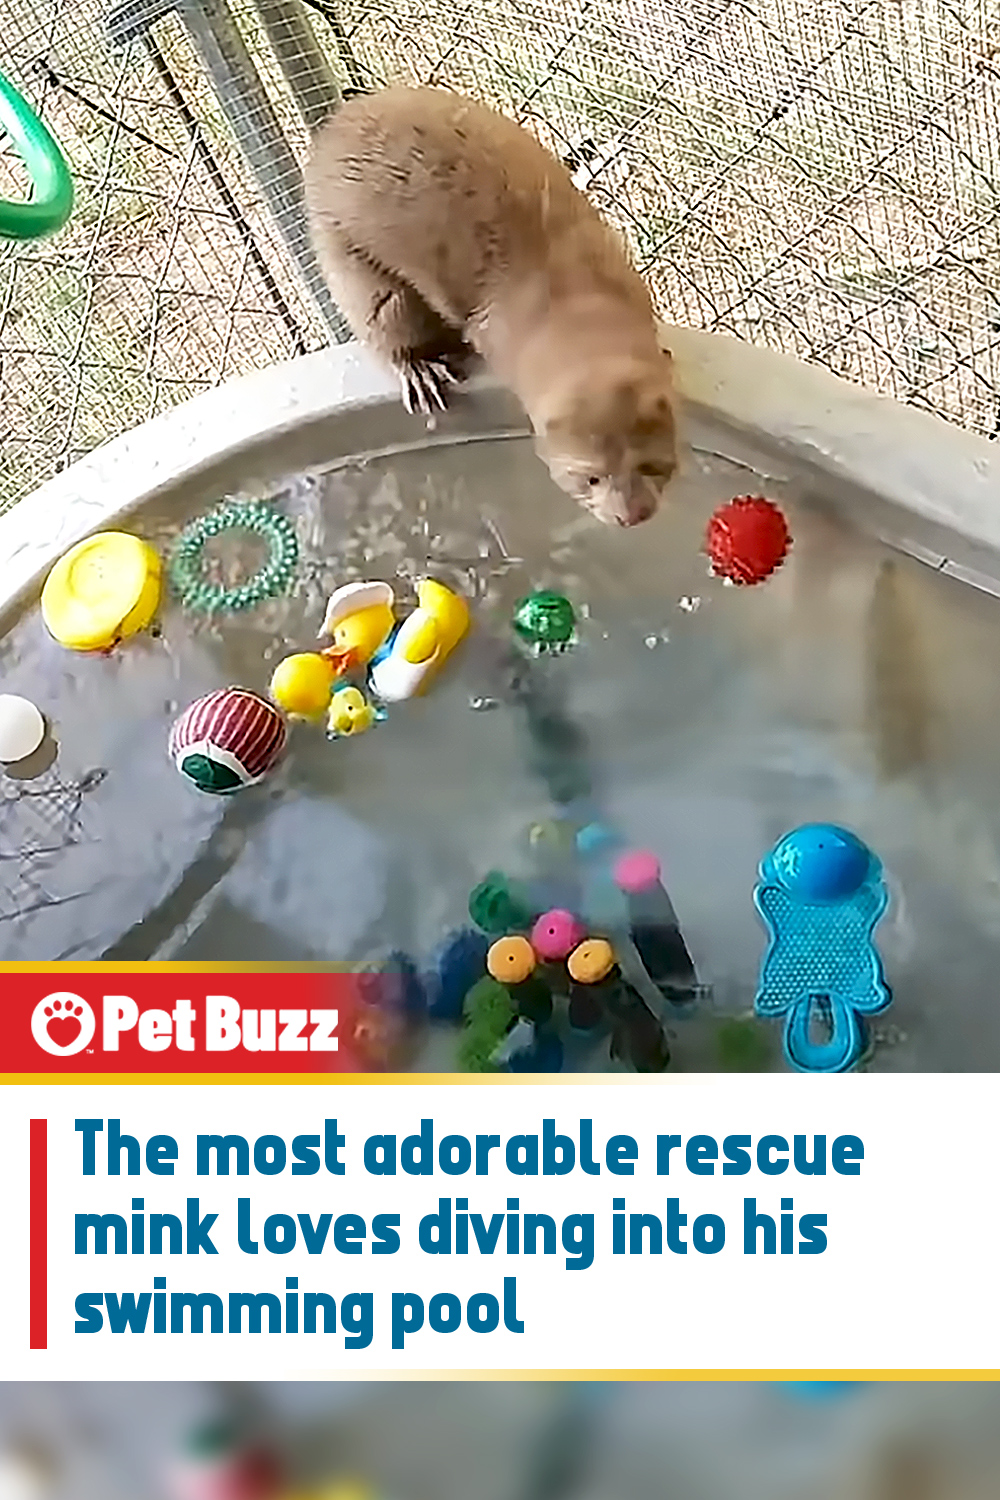 The most adorable rescue mink loves diving into his swimming pool